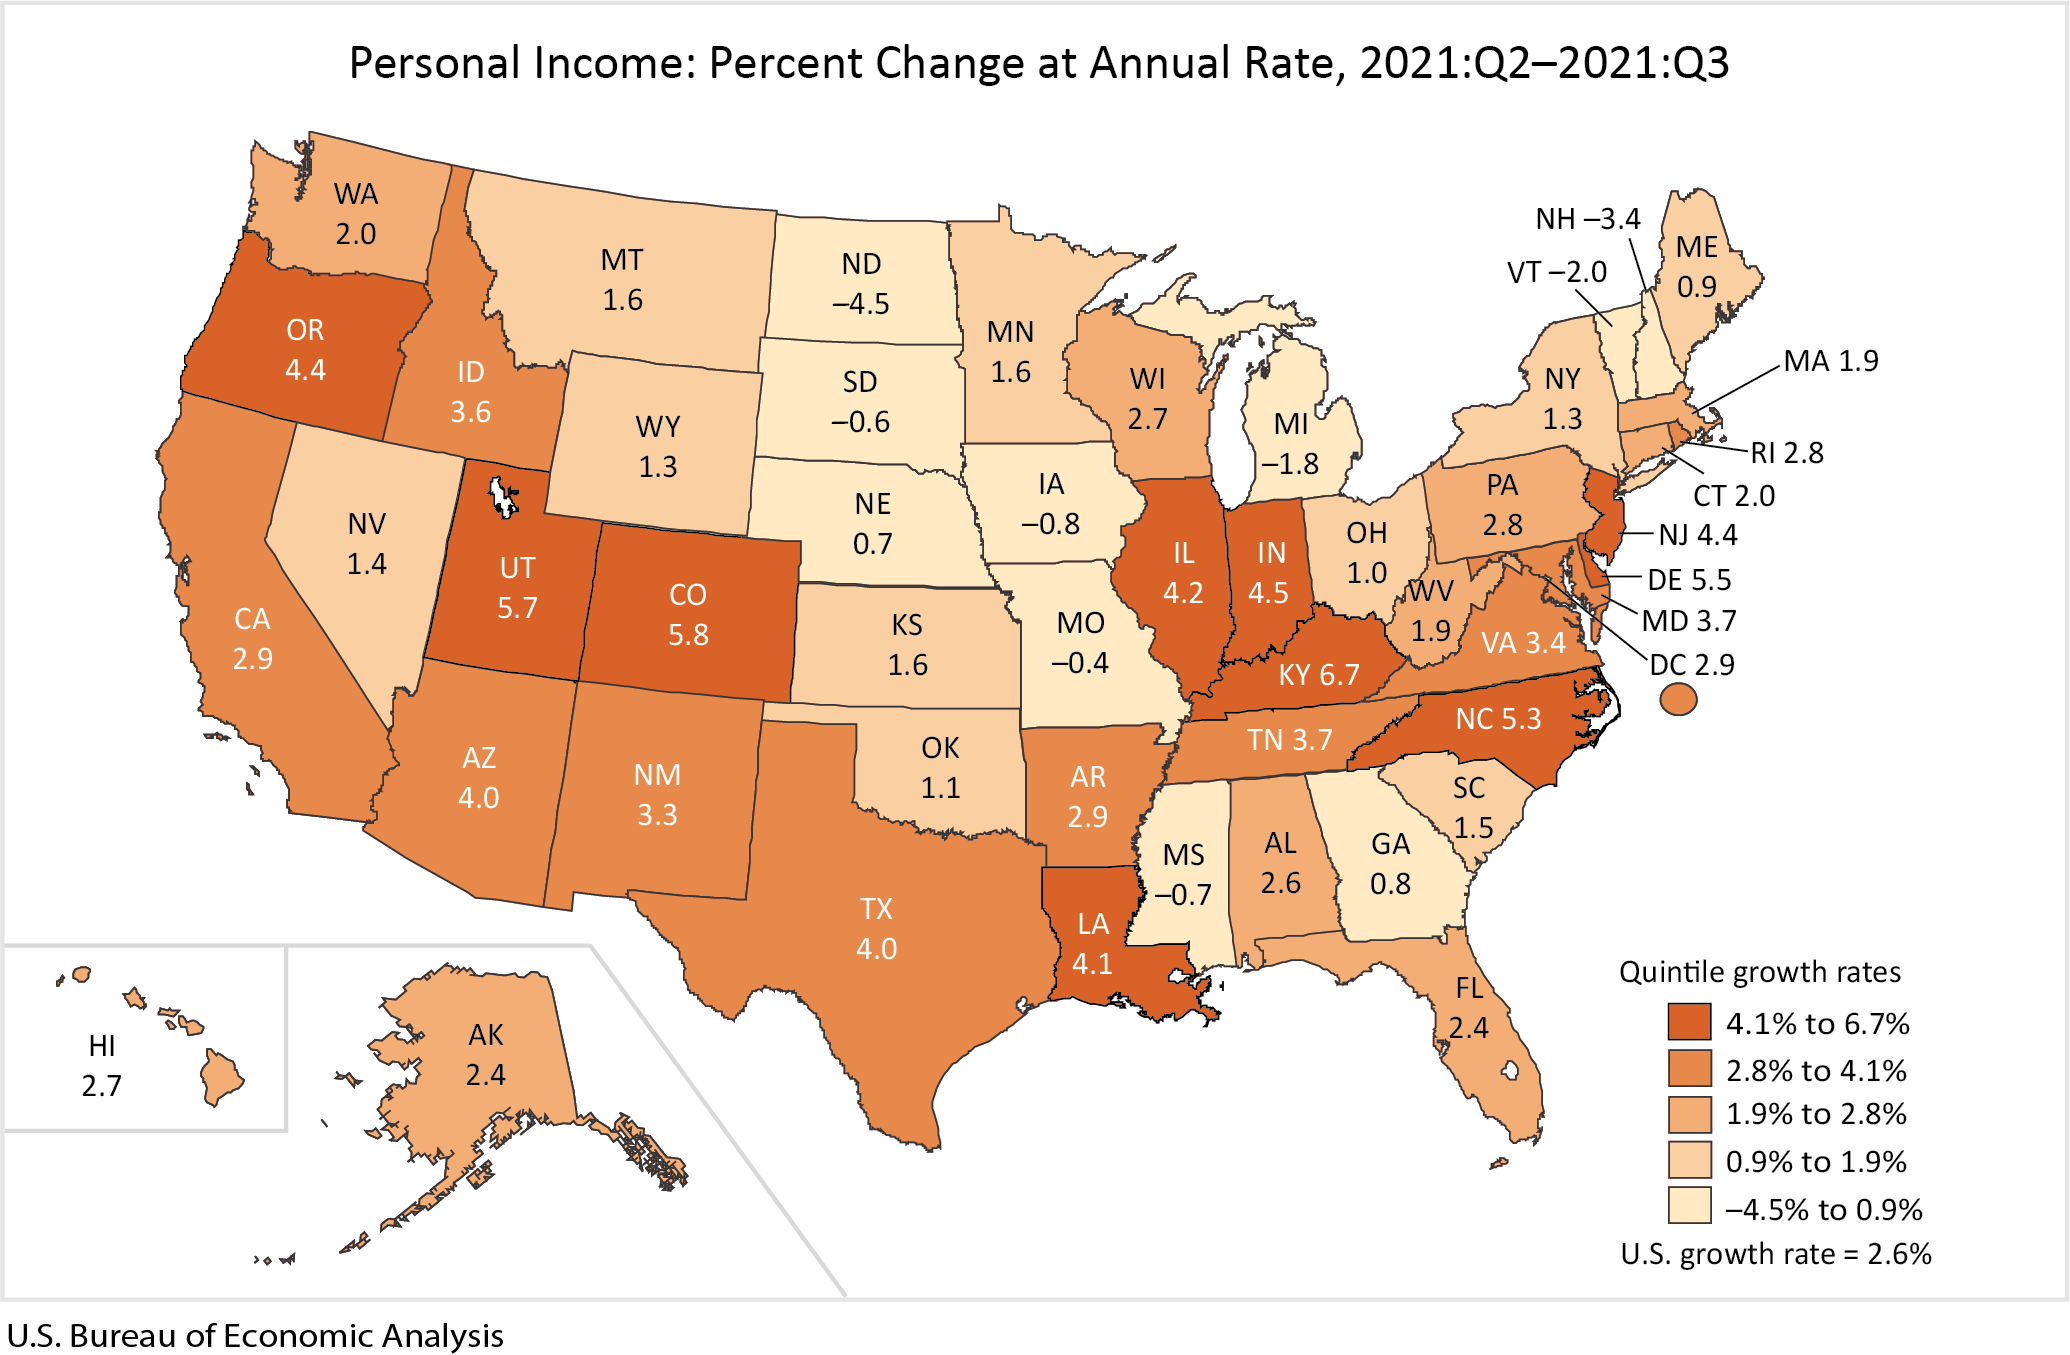 Personal Income: Percent Change at Annual Rate, 2021:Q2-2021:Q3